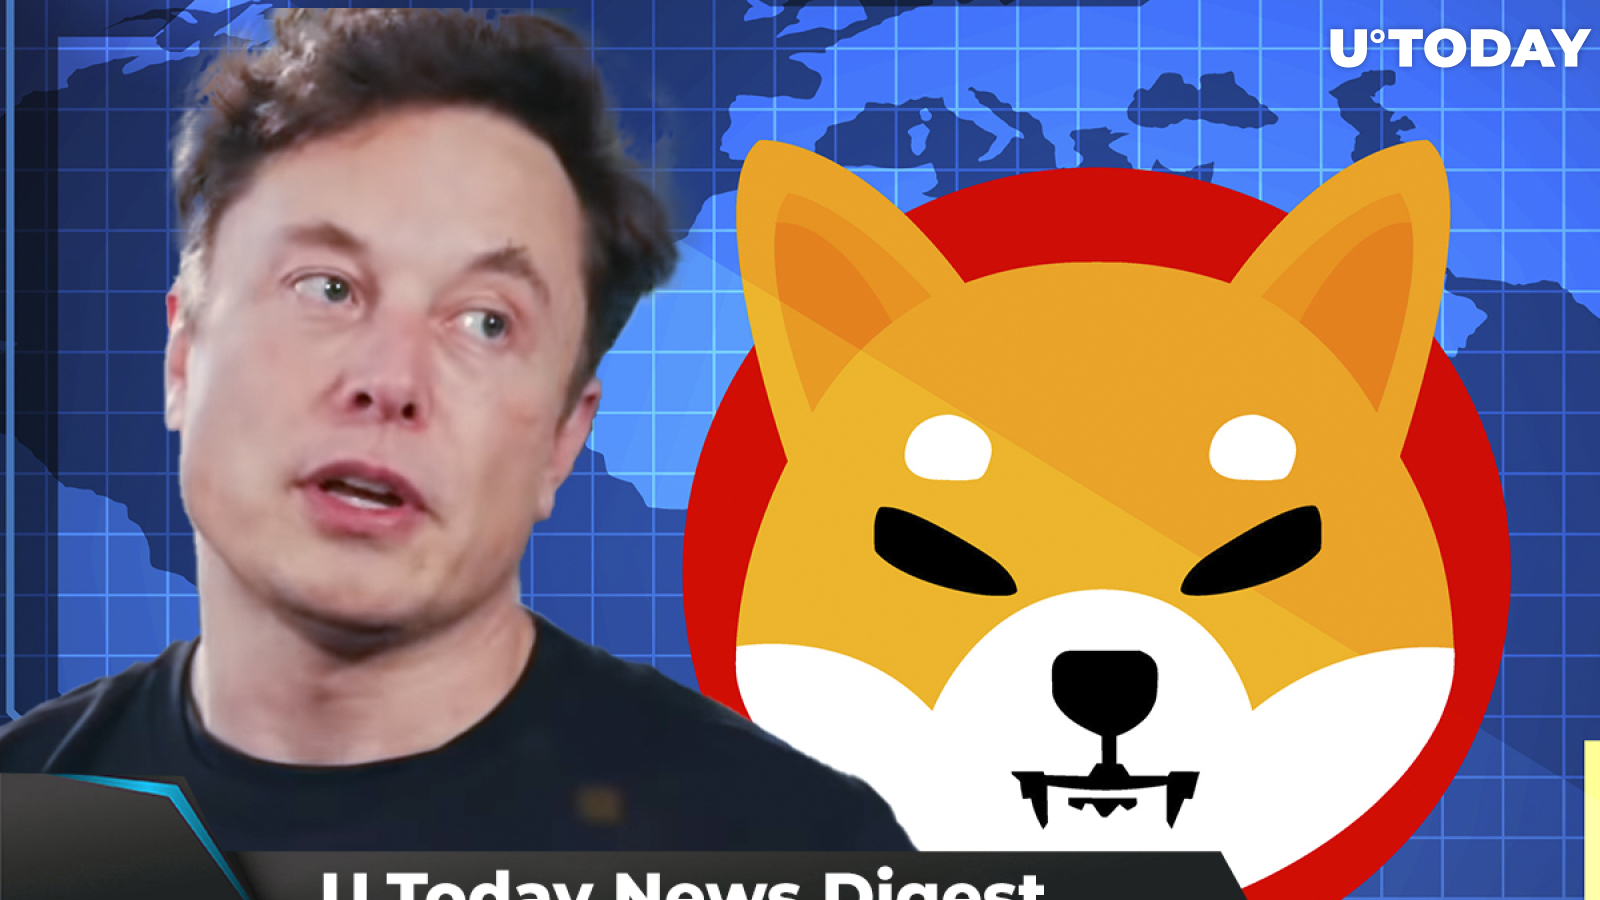 Elon Musk to Become 1st DOGE Trillionaire, SHIB Hits New ATH, Surpasses Ether by Trading Volume: Crypto News Digest by U.Today